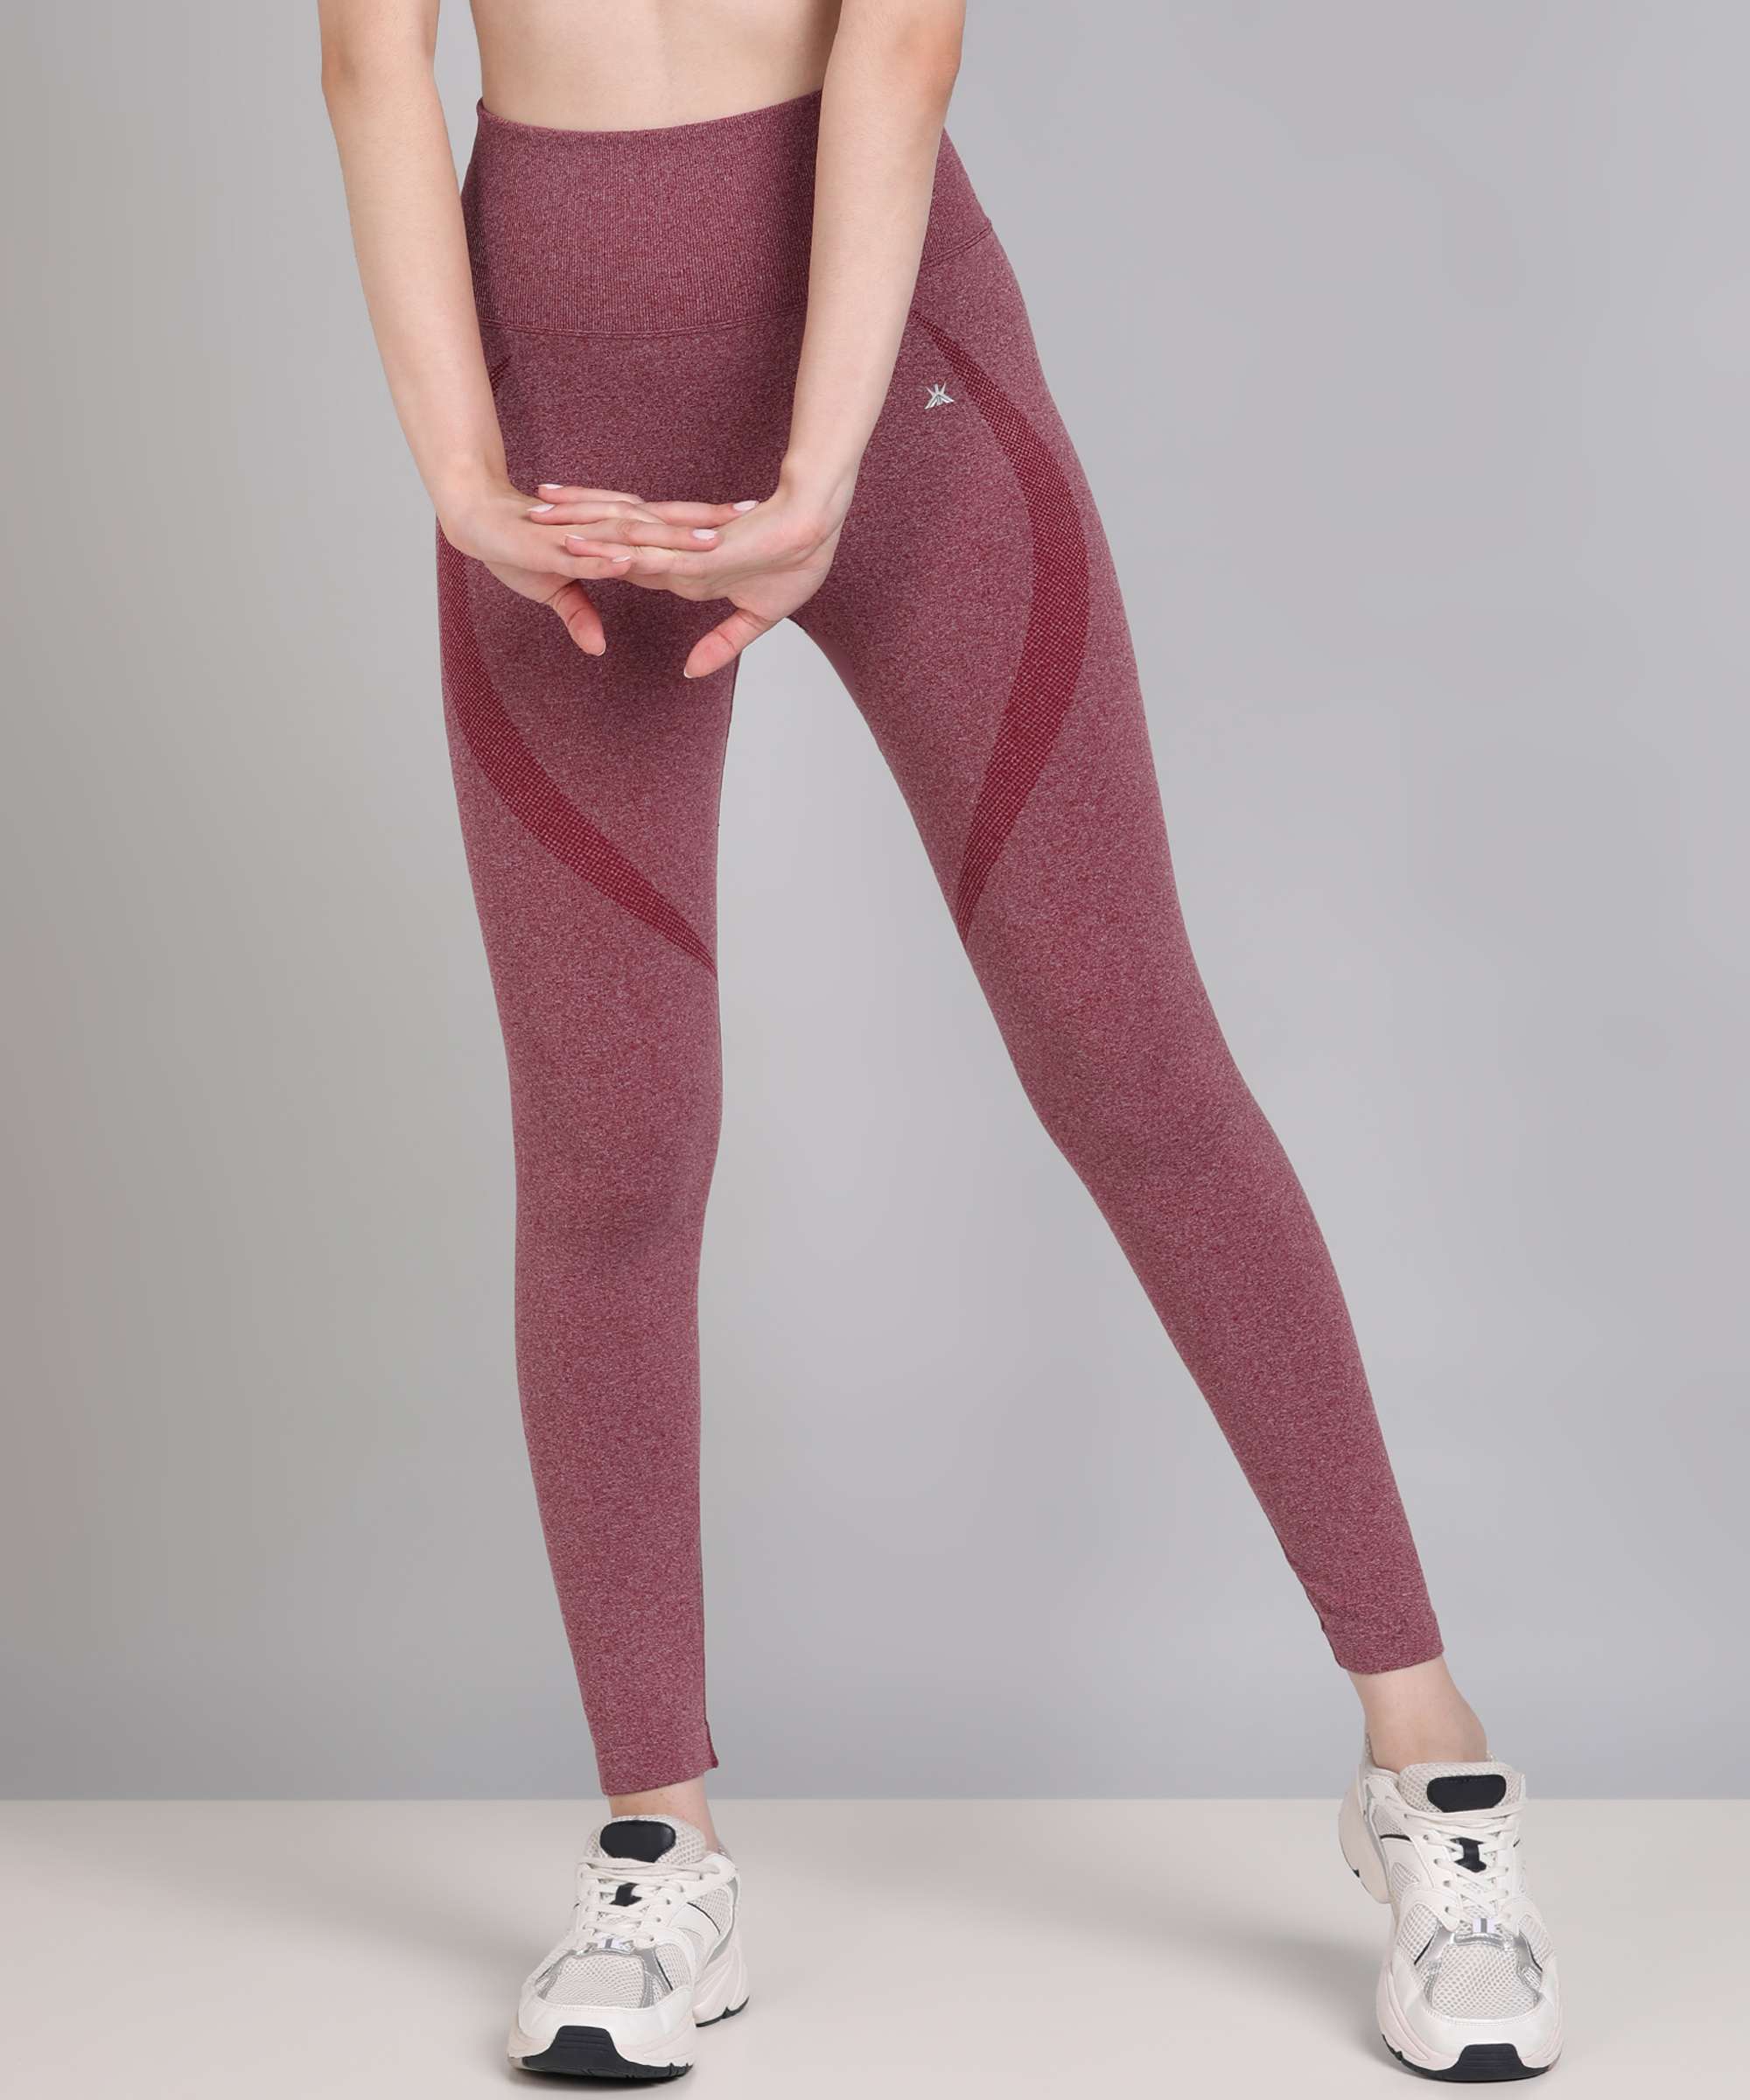 Seamless Flexure Leggings - KOBO SPORTS Exclusively Designed For Sports